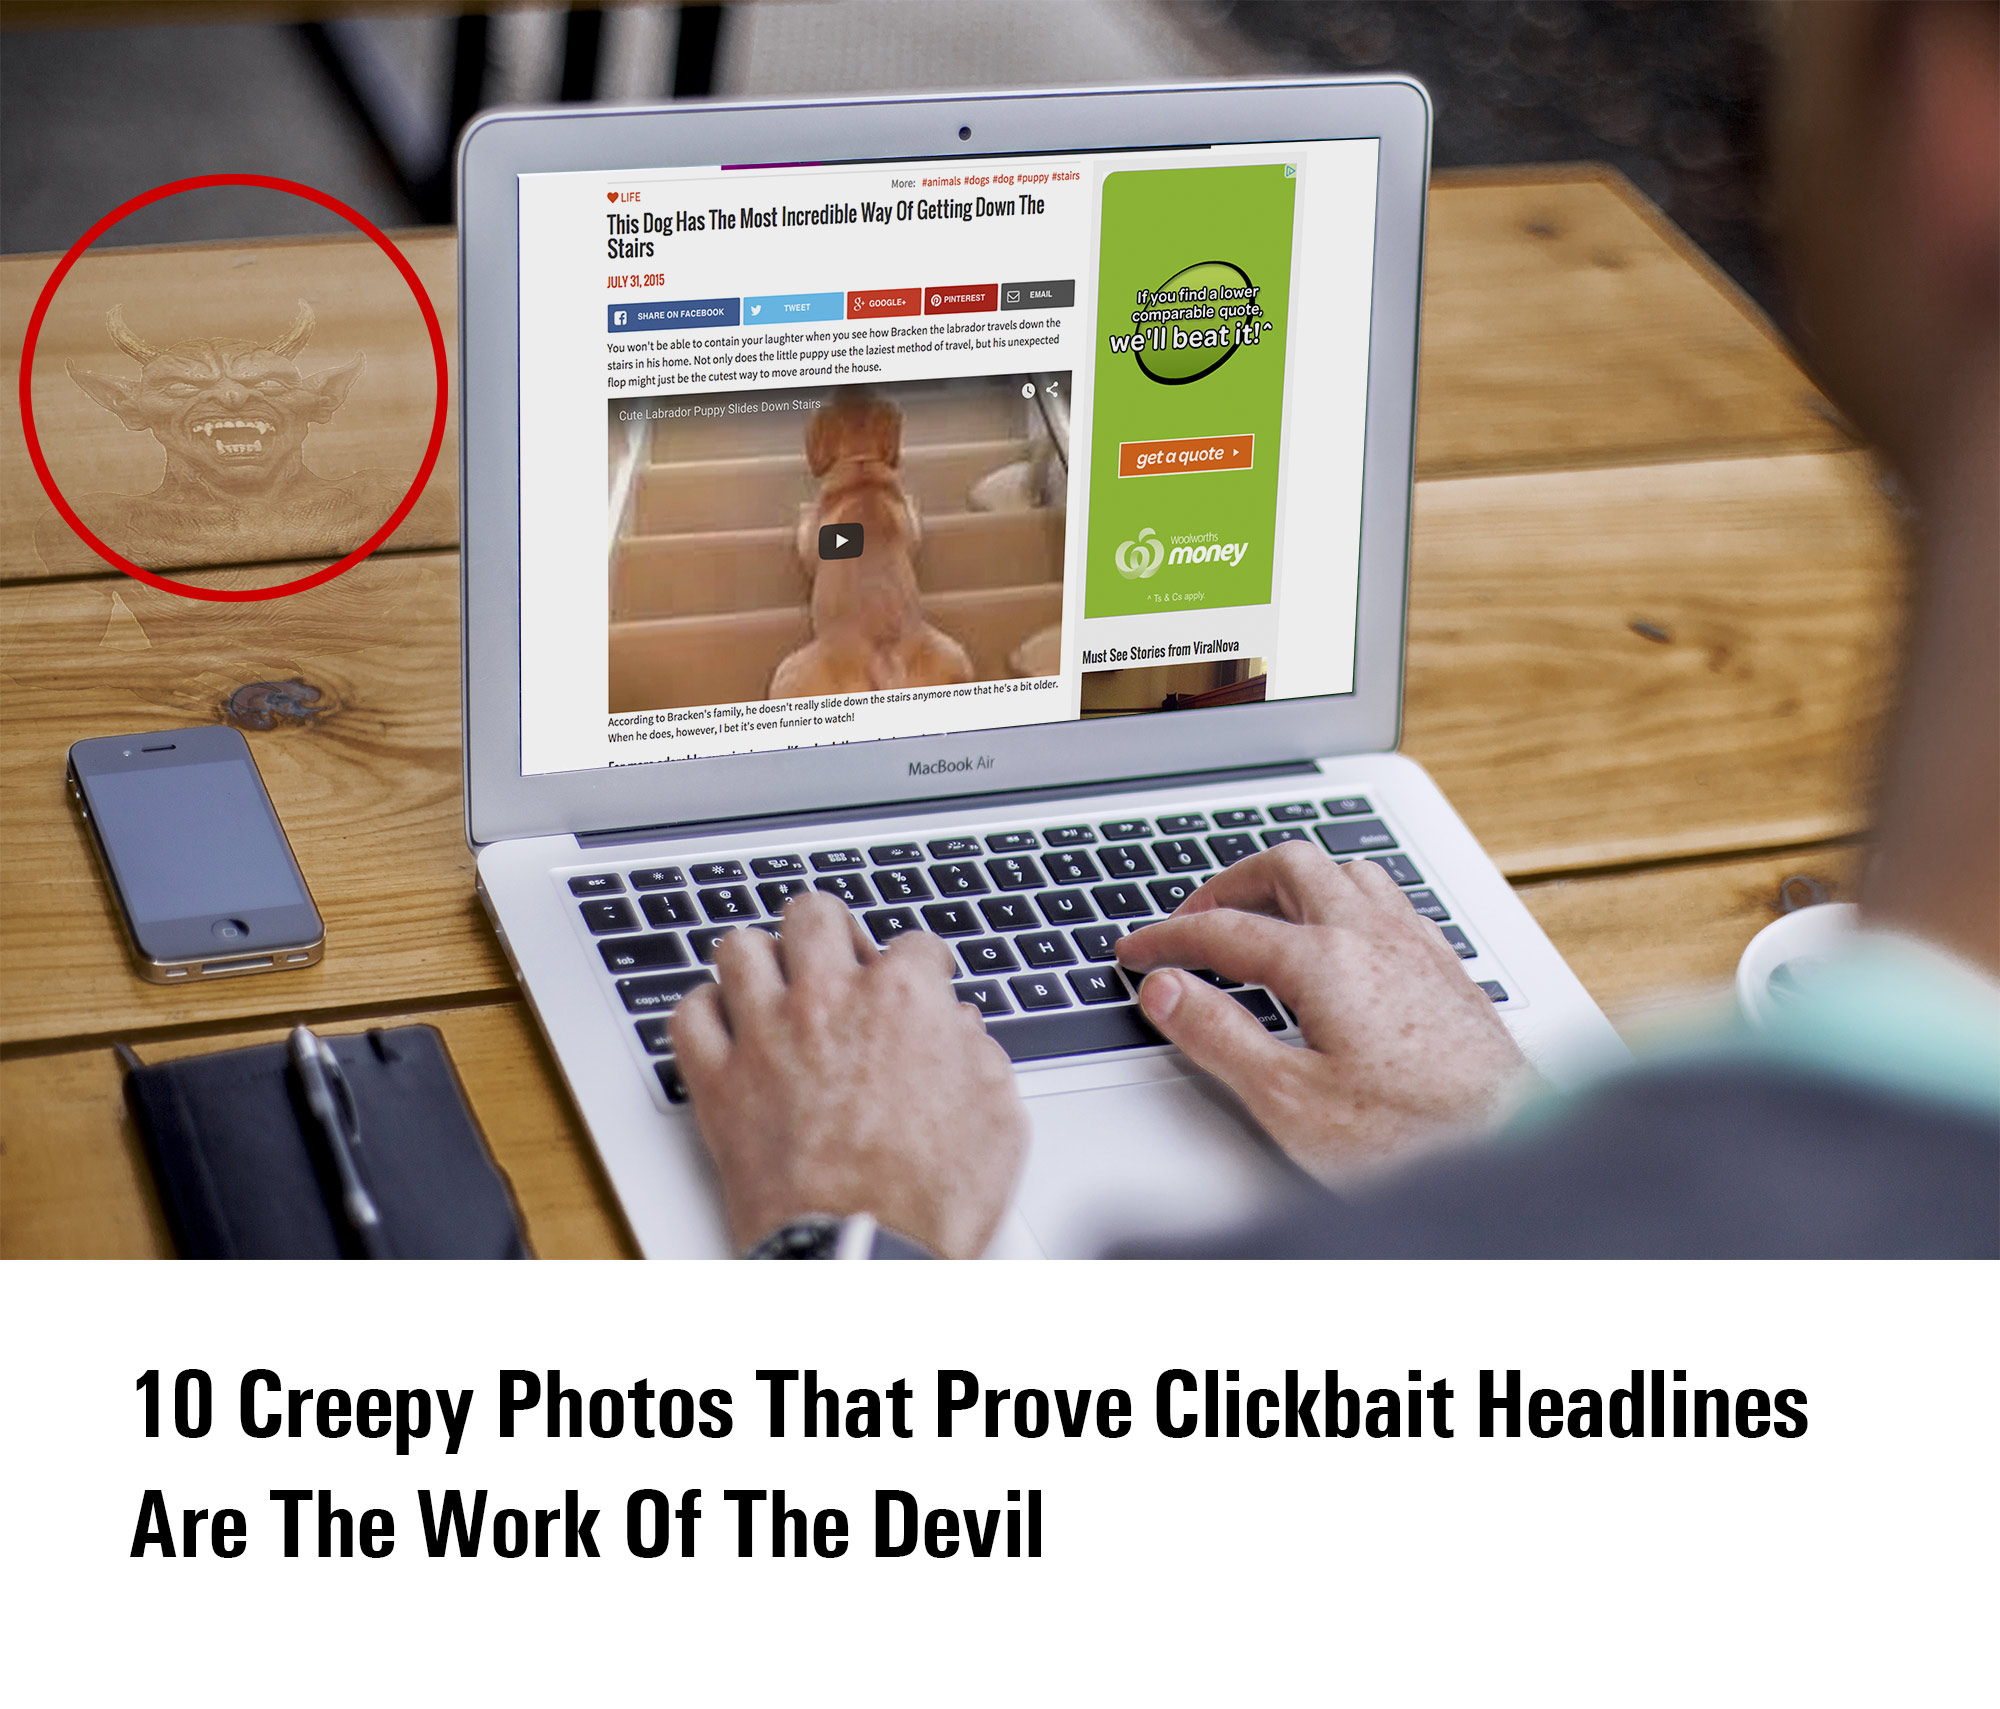 Feature image for clickbait headlines post